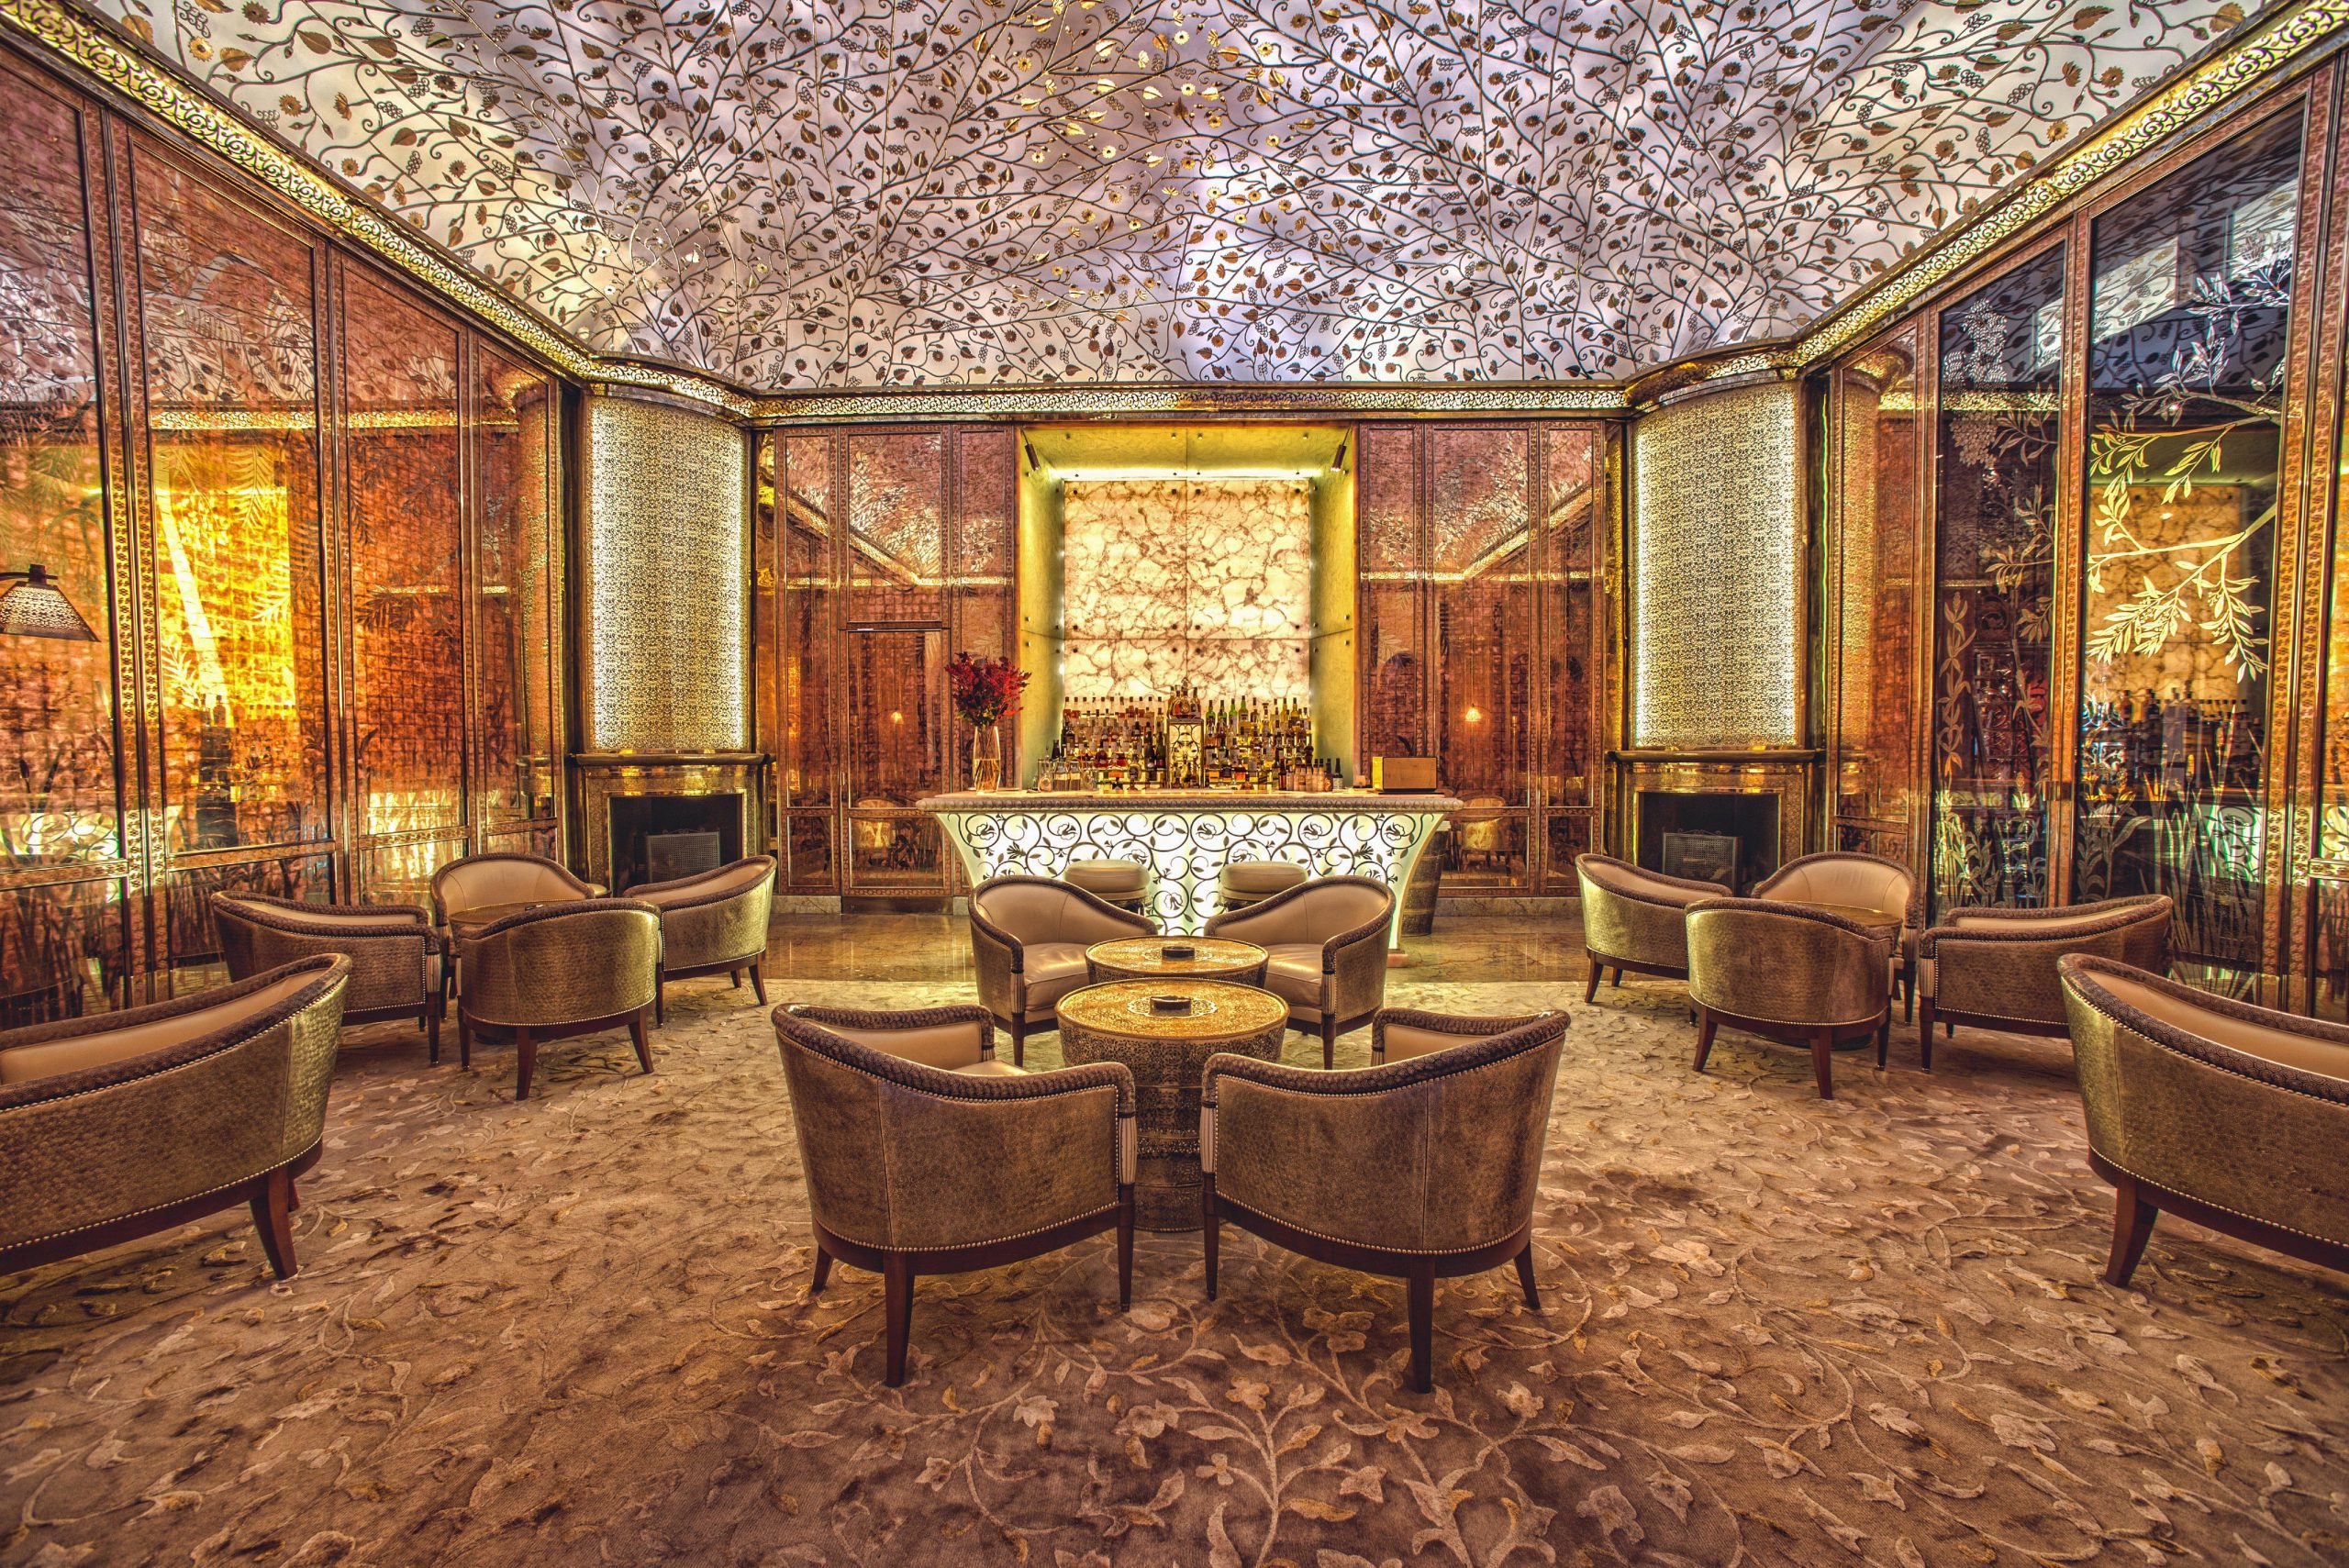 Elegant bar area in a 5-star hotel in Morocco, featuring intricate glass and metalwork ceiling, mirrored copper walls, and luxurious armchairs arranged around an aluminized bar.